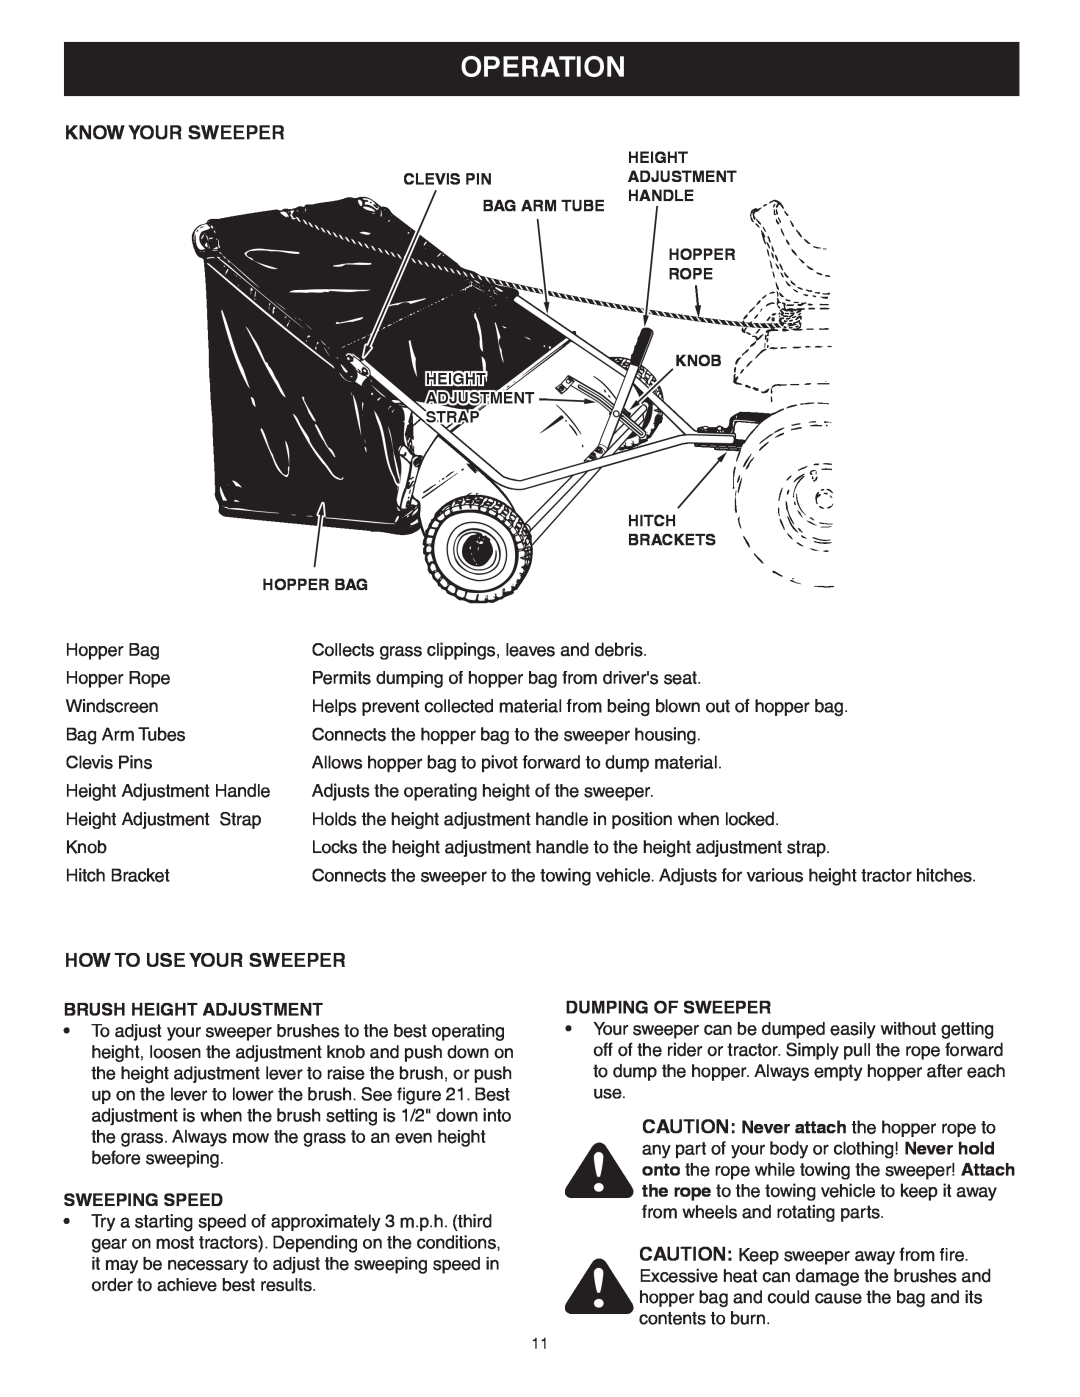 Craftsman 486.24207 owner manual Operation, Know Your Sweeper, How To Use Your Sweeper 